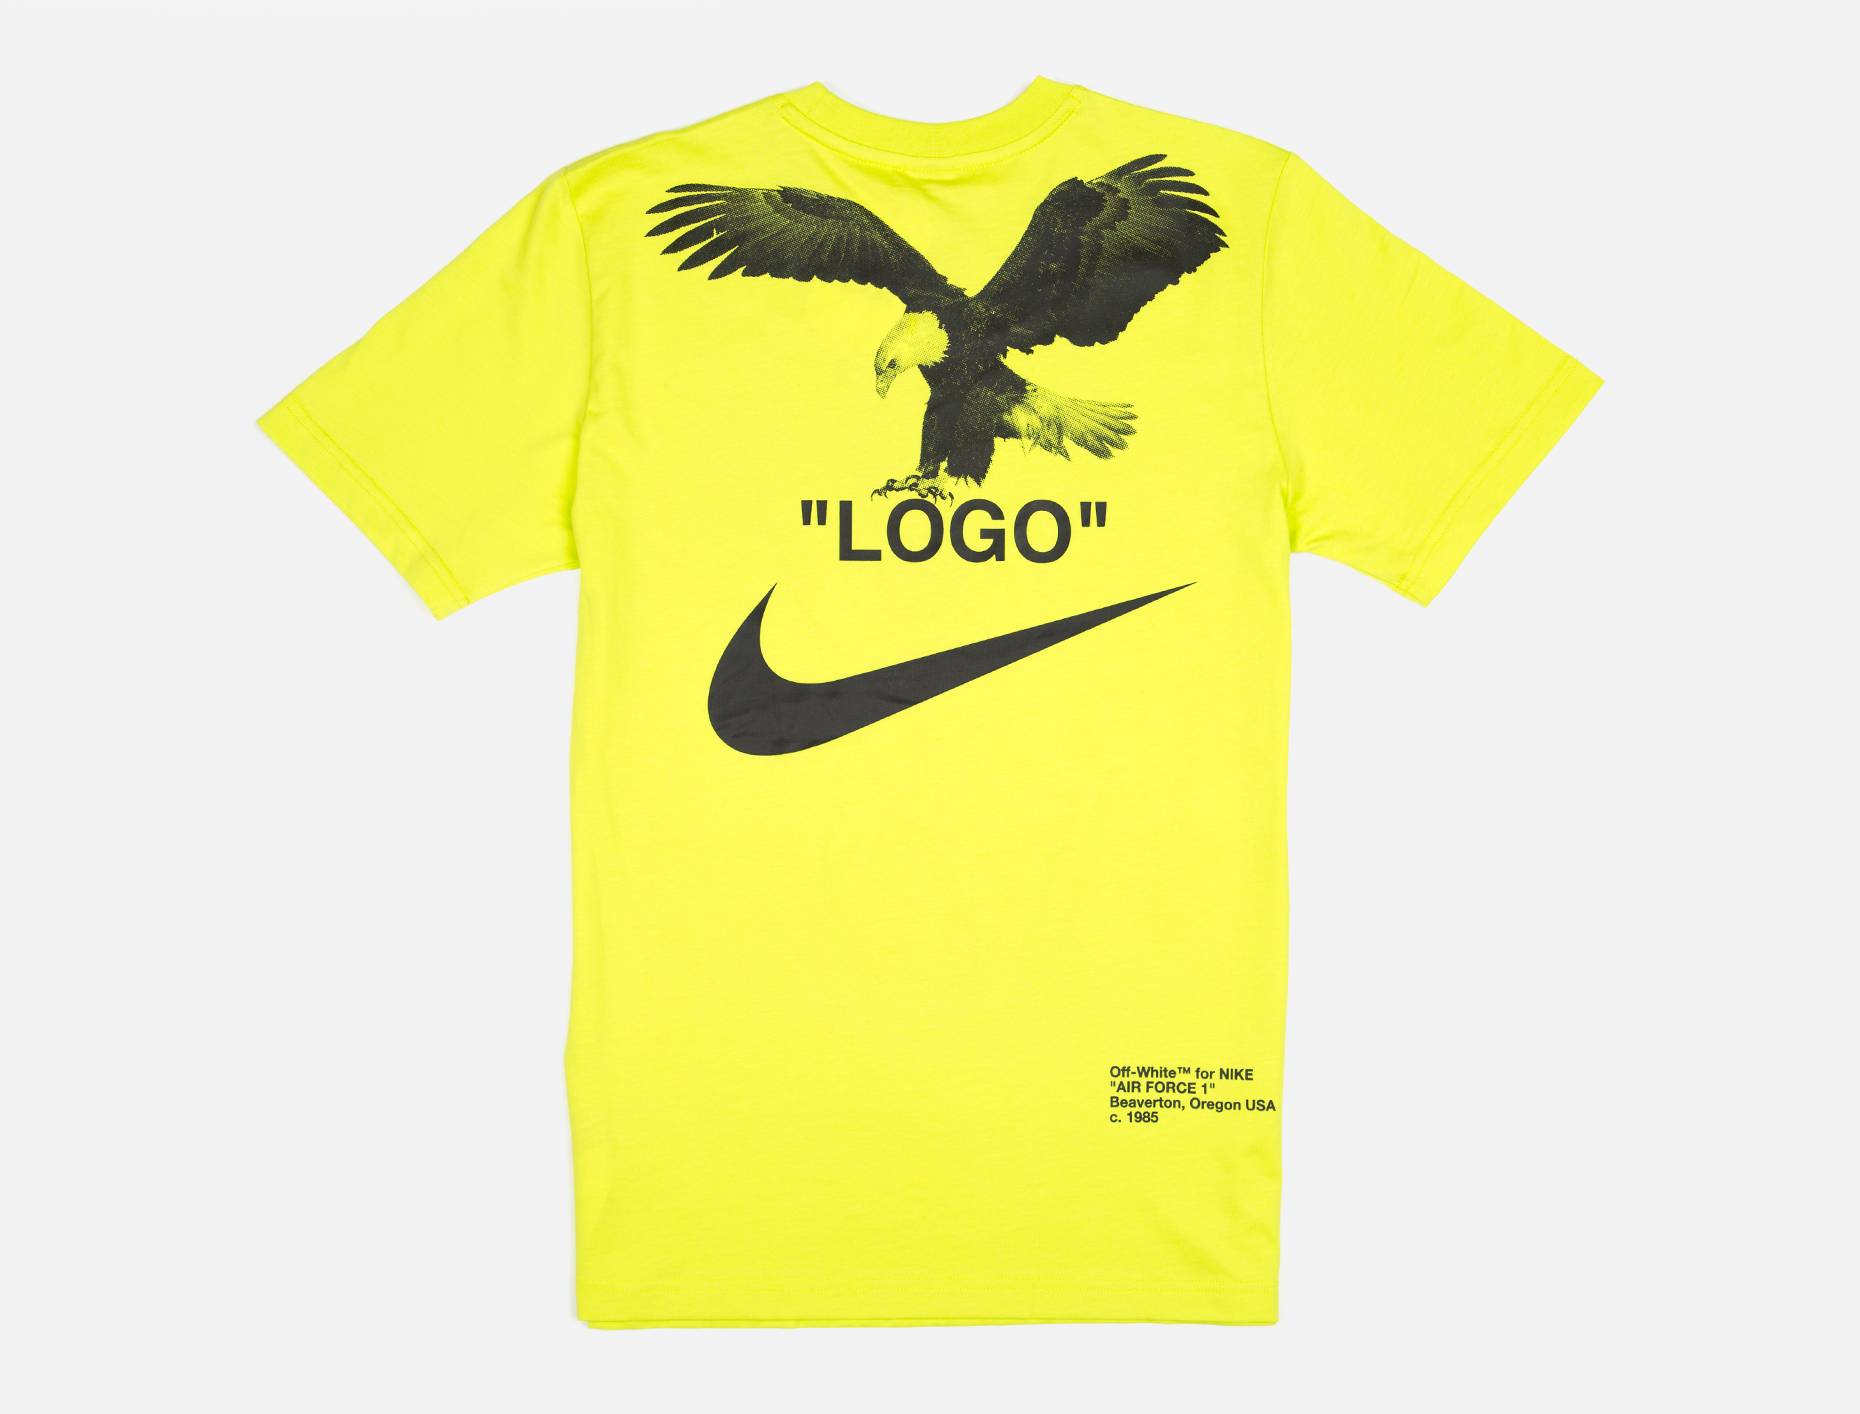 Nike x off white t shirt dress for women reflections lincoln